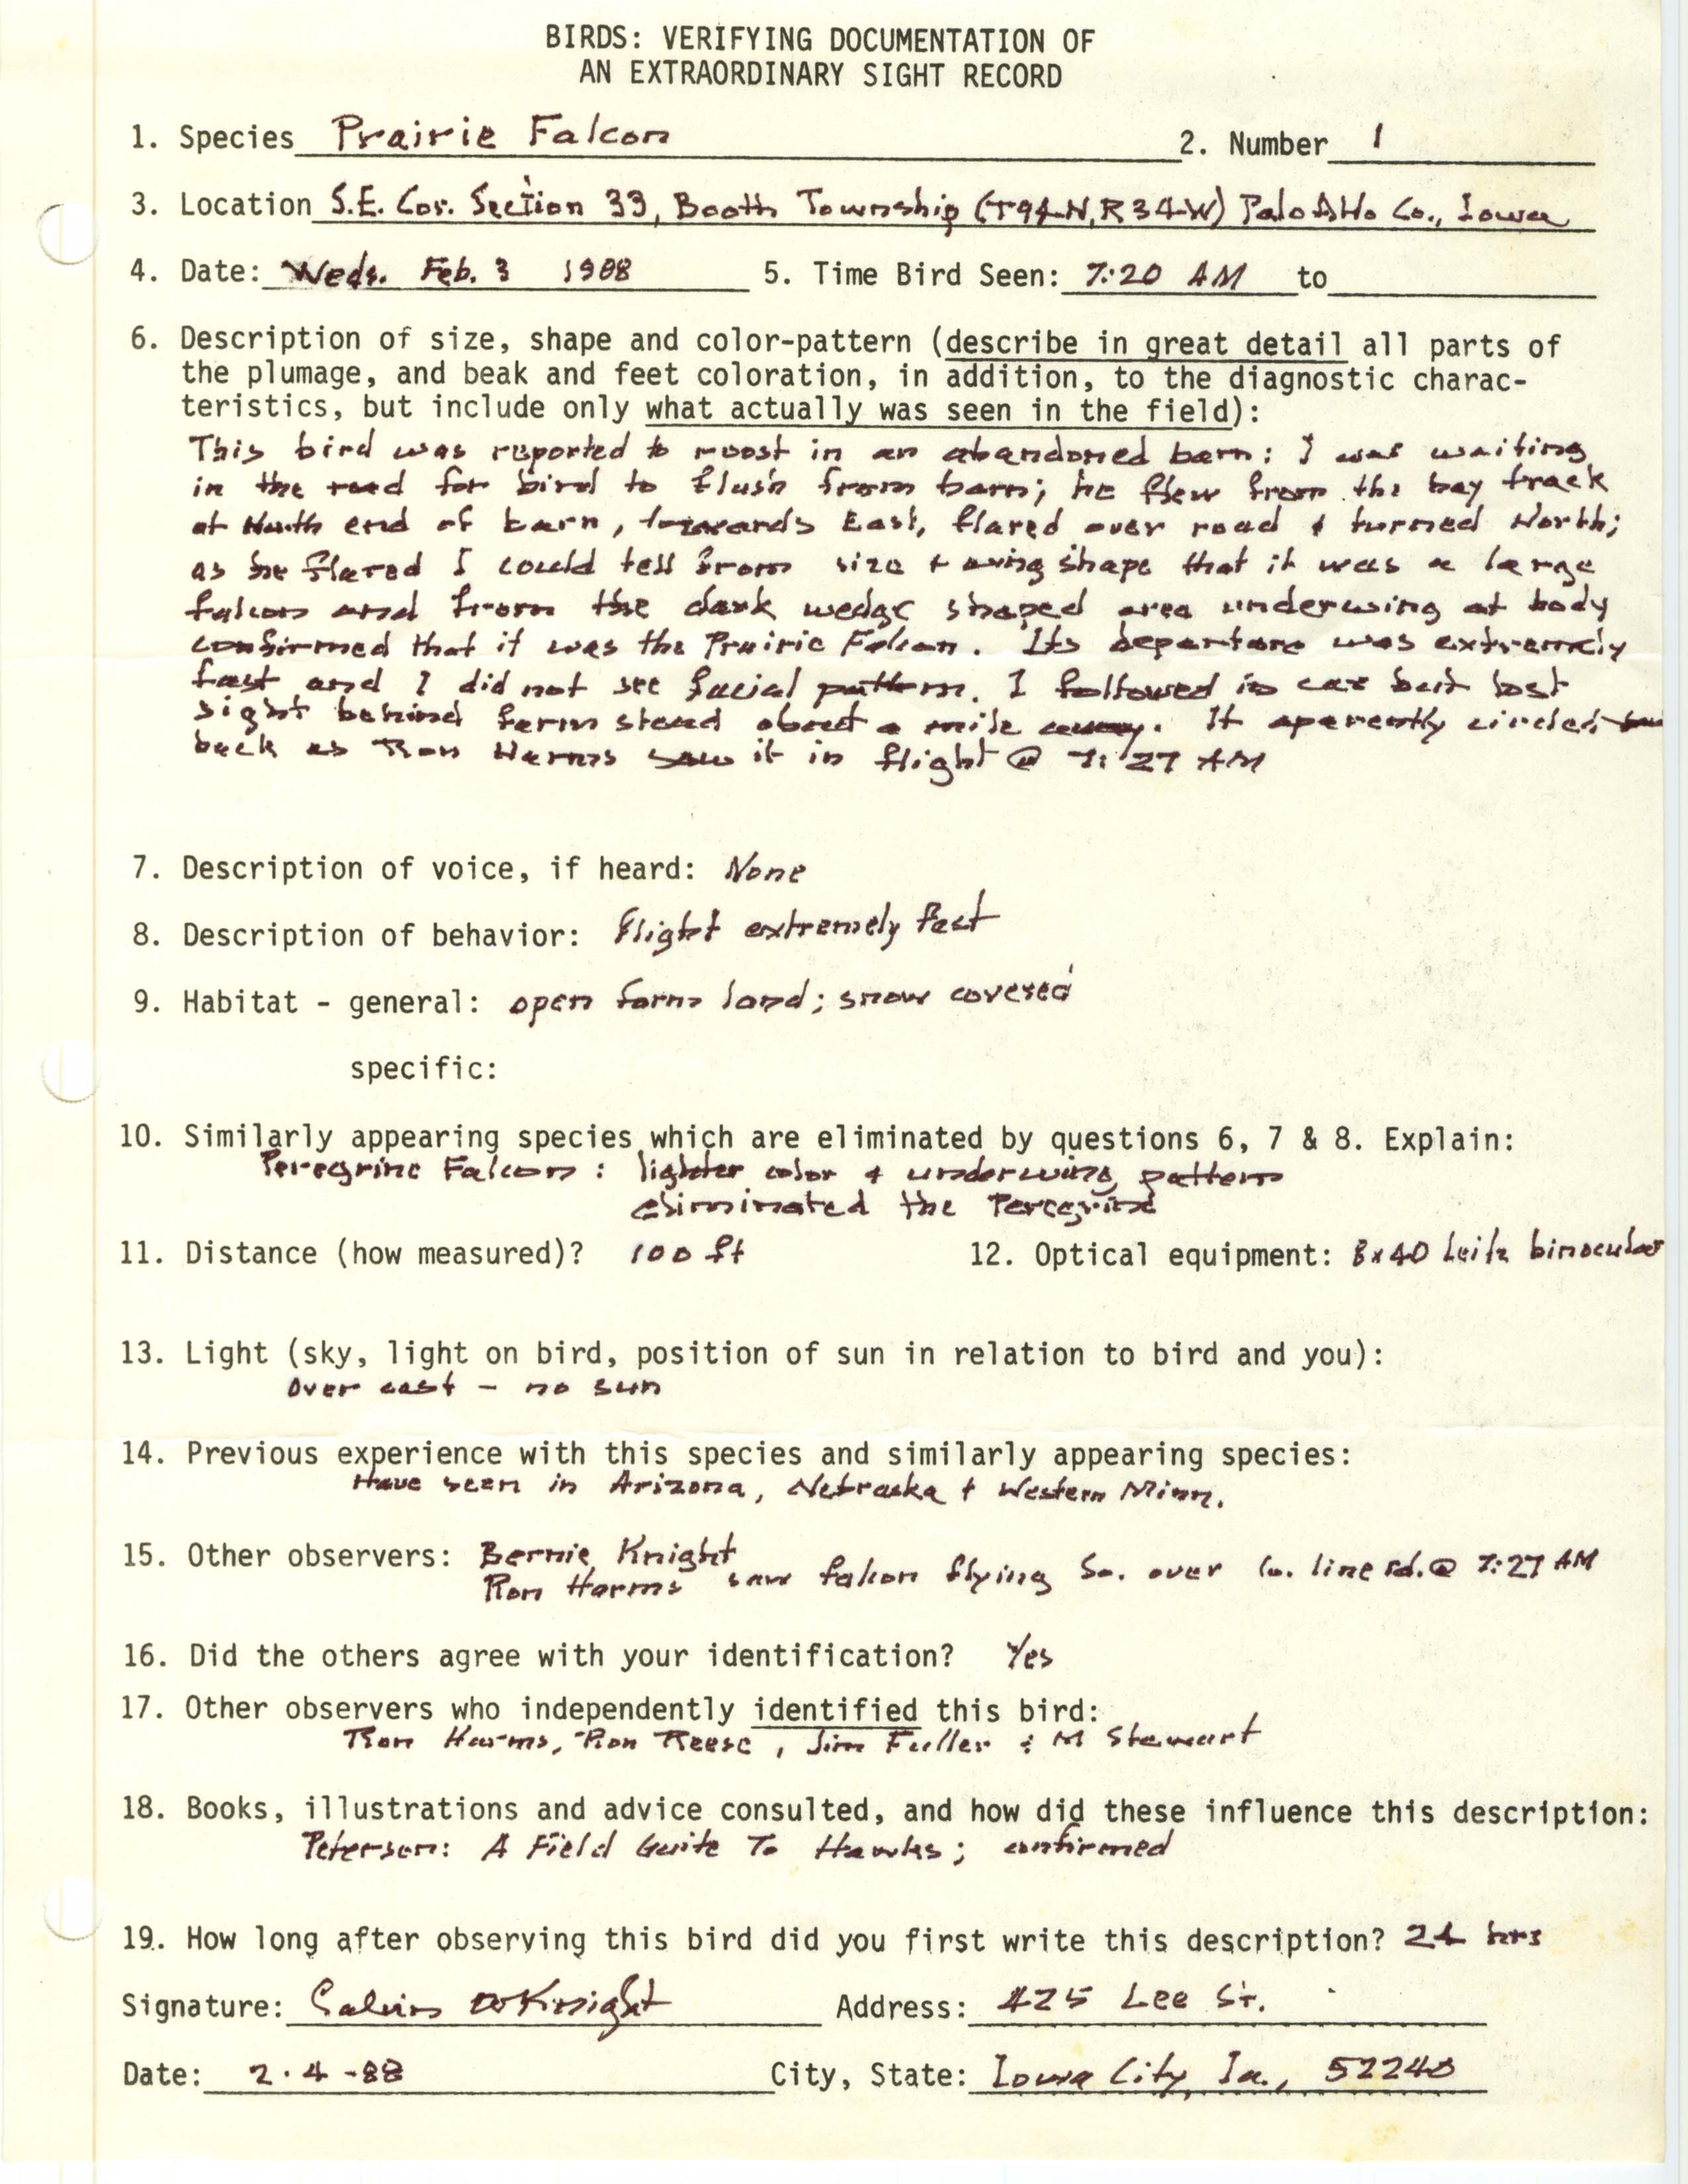 Rare bird documentation form for Prairie Falcon at Booth Township in Palo Alto County, 1988